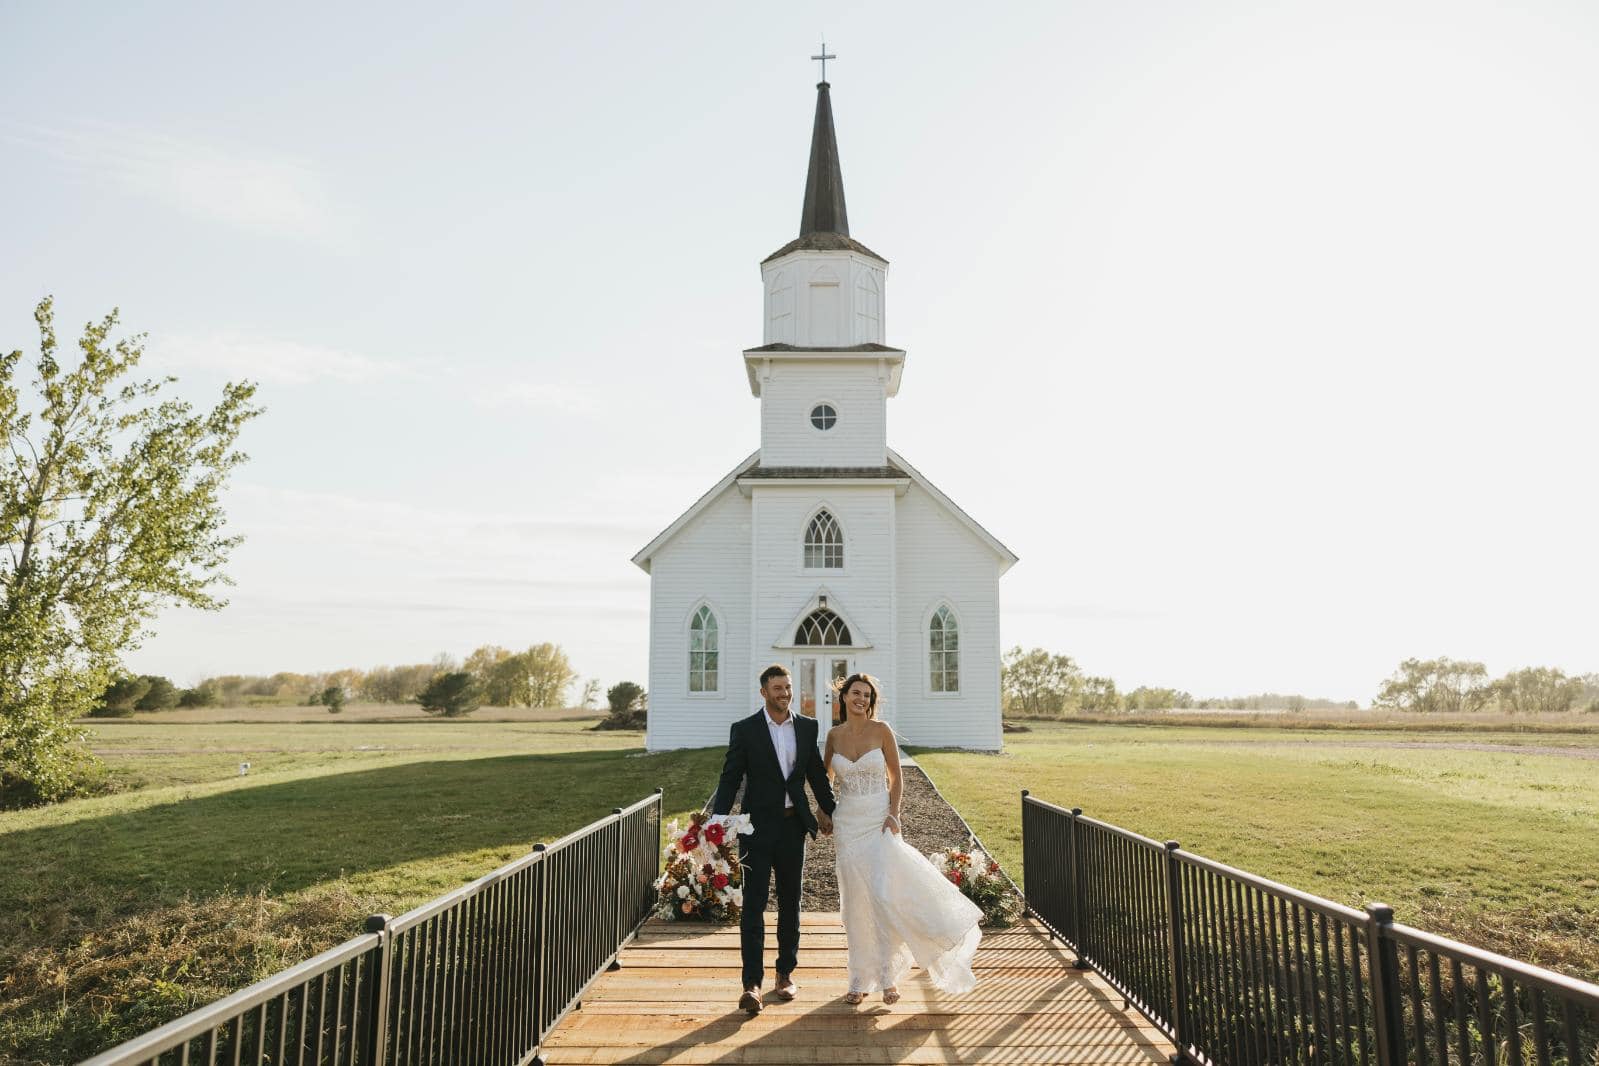 In this serene image, a newlywed couple walks hand in hand away from a quaint, traditional white chapel, symbolizing their first steps together in marriage. The chapel, with its classic steeple and arched windows, sits elegantly against a clear blue sky. The surrounding landscape, open and tranquil, suggests a peaceful rural setting. This picturesque moment captures the essence of a joyful and intimate wedding day.